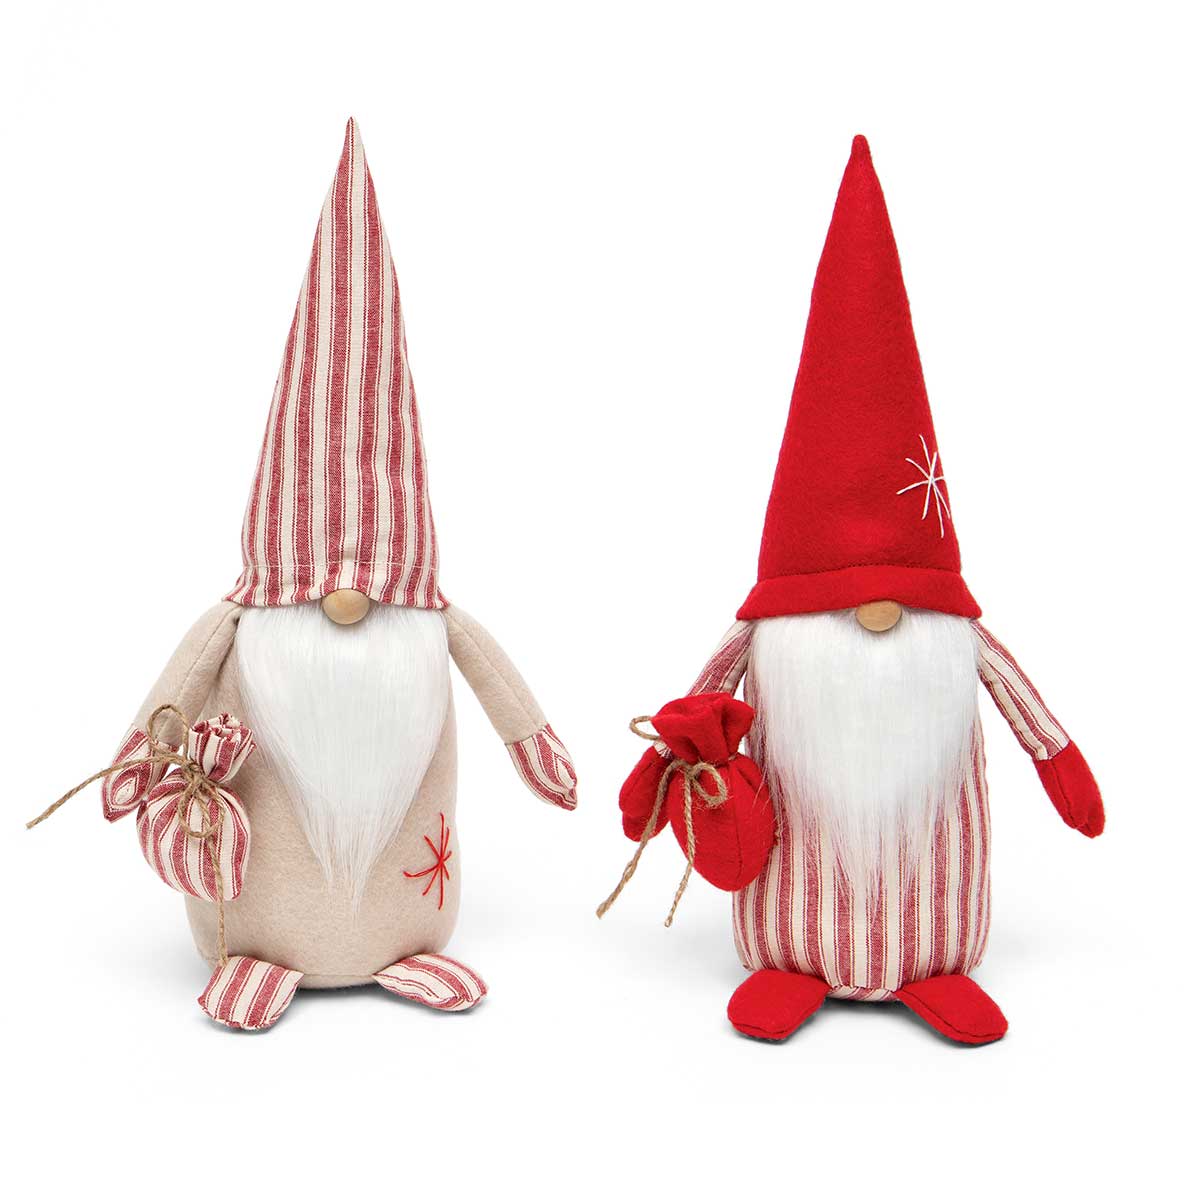 !KRIS GNOME RED/BEIGE WITH BAG, TICKING, WOOD NOSE b50